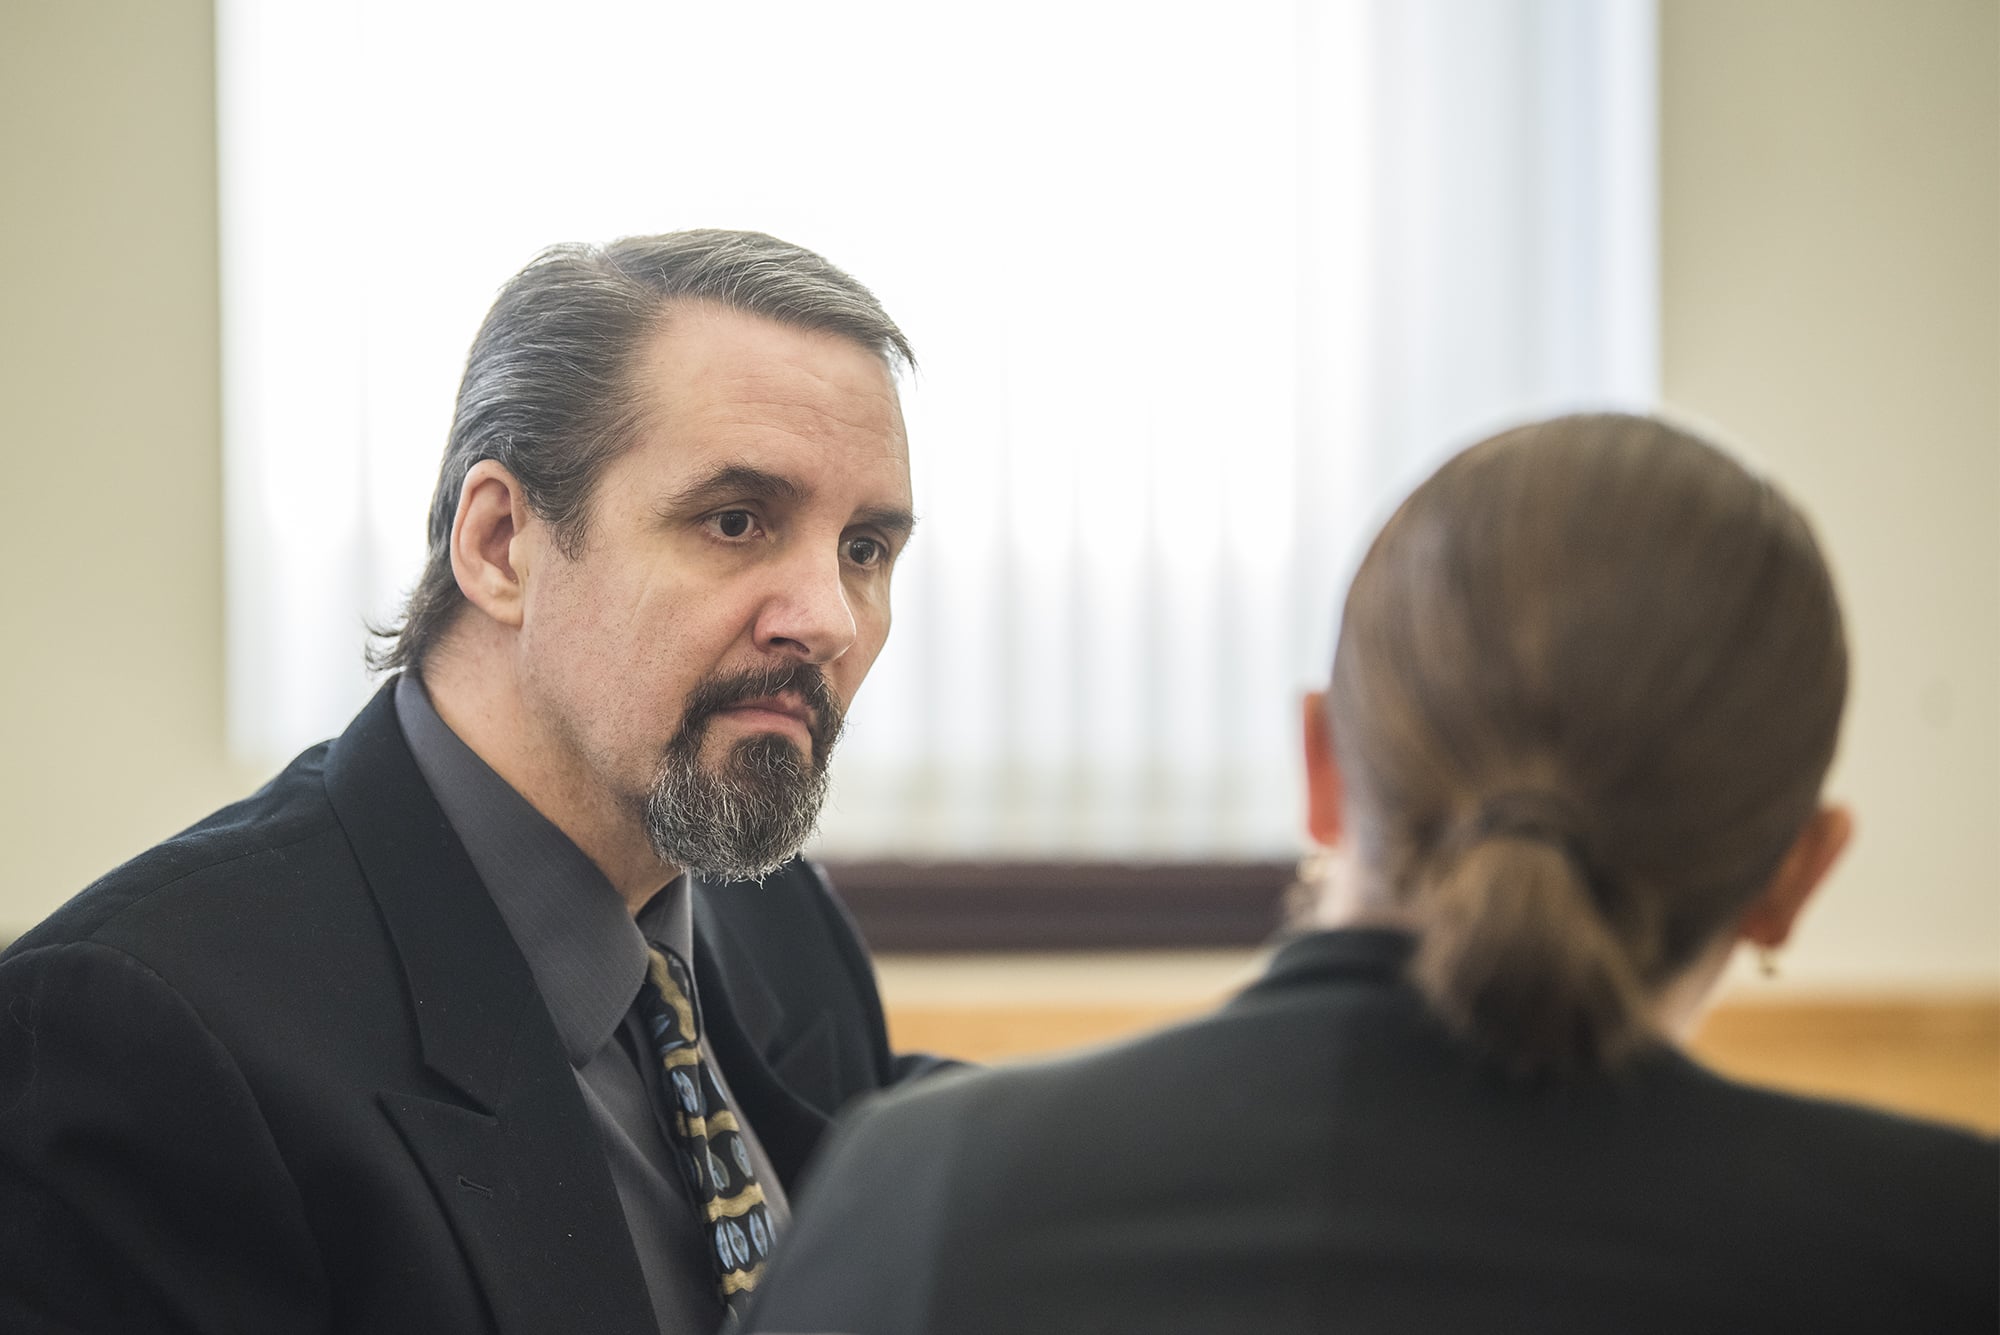 Ronald Jay Bianchi, left, speaks with one of his attorneys, Whitney Hawke of Vancouver Defenders, before the start of his trial Monday morning in Clark County Superior Court. Prosecutors filed amended charges against Bianchi after the Washington Court of Appeals in 2017 vacated three of his convictions tied to a 1997 Vancouver bank robbery.